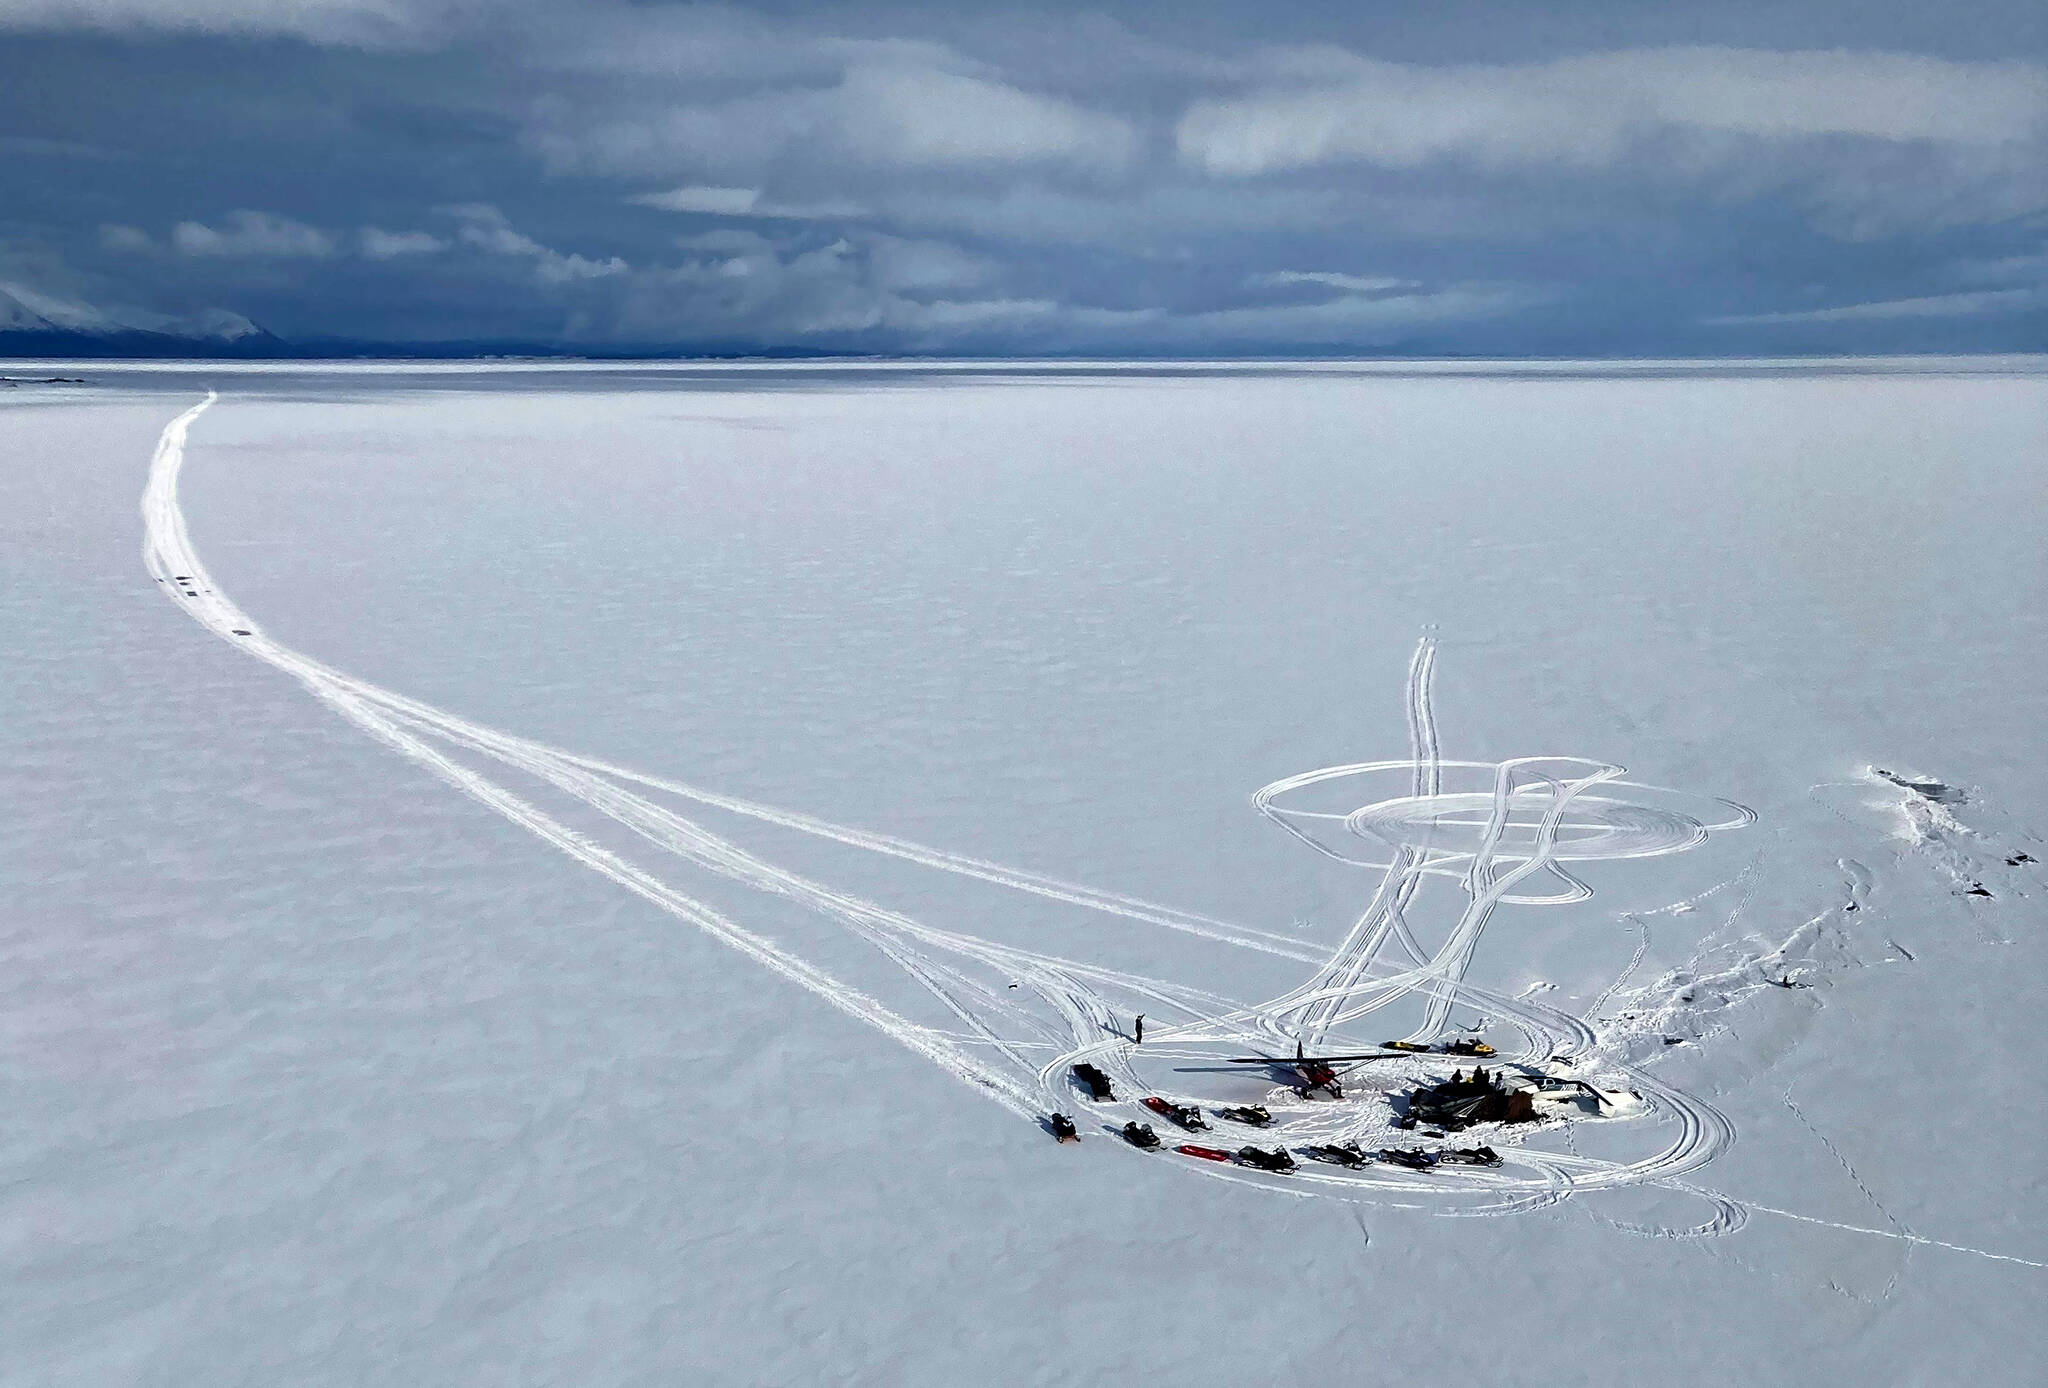 In this aerial photo provided by Alaska State Troopers, an Alaska Air National Guard helicopter arrives at a frozen lake that was the scene of a small plane crash on Saturday, March 5, 2022, near Iliamna, Alaska. Authorities say the five people on board the plane were injured. (Trooper Travis Lons/Alaska State Troopers via AP)